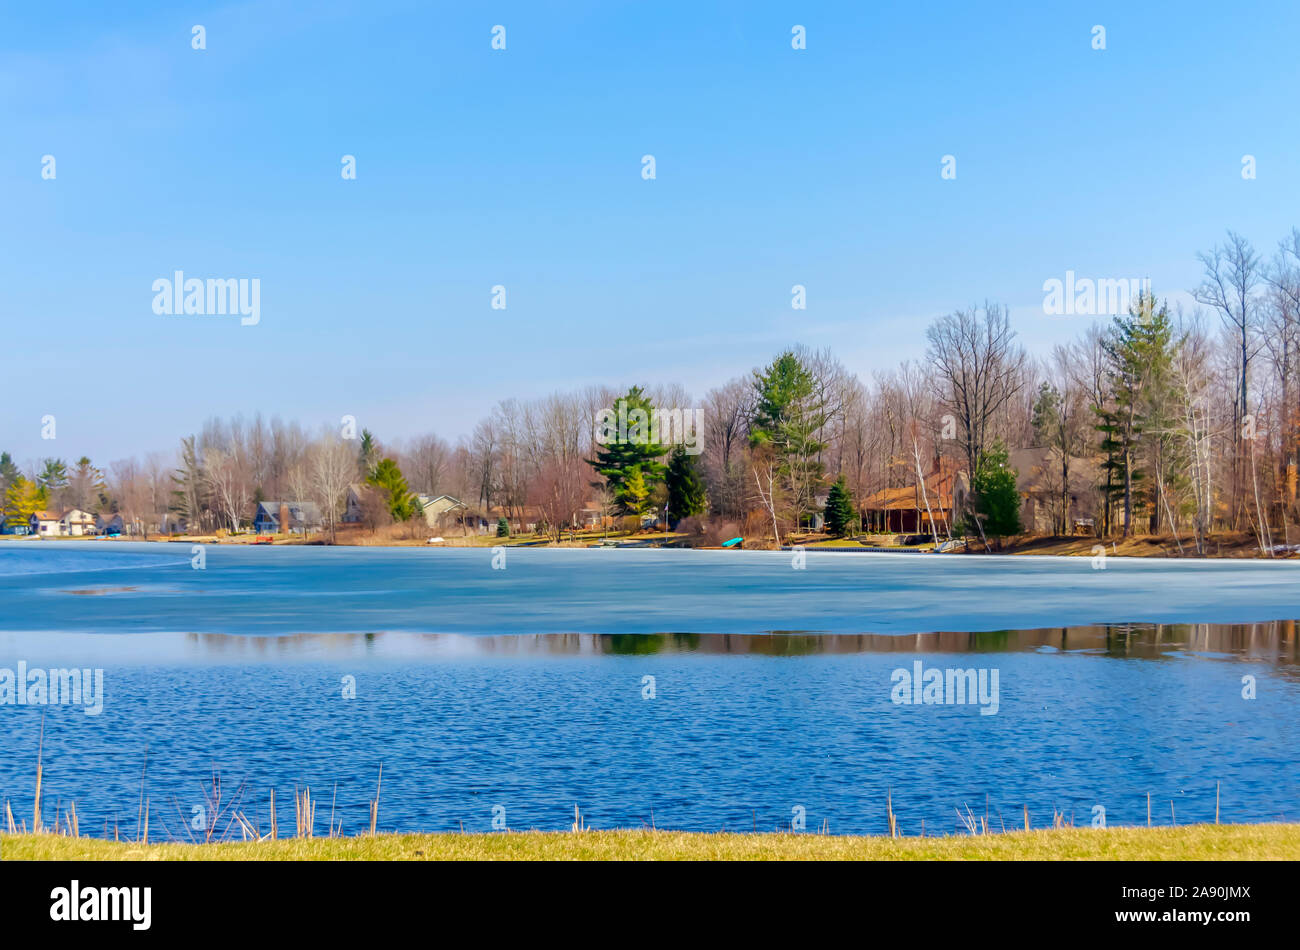 Lakeside houses in Upper Michigan, USA. Stock Photo